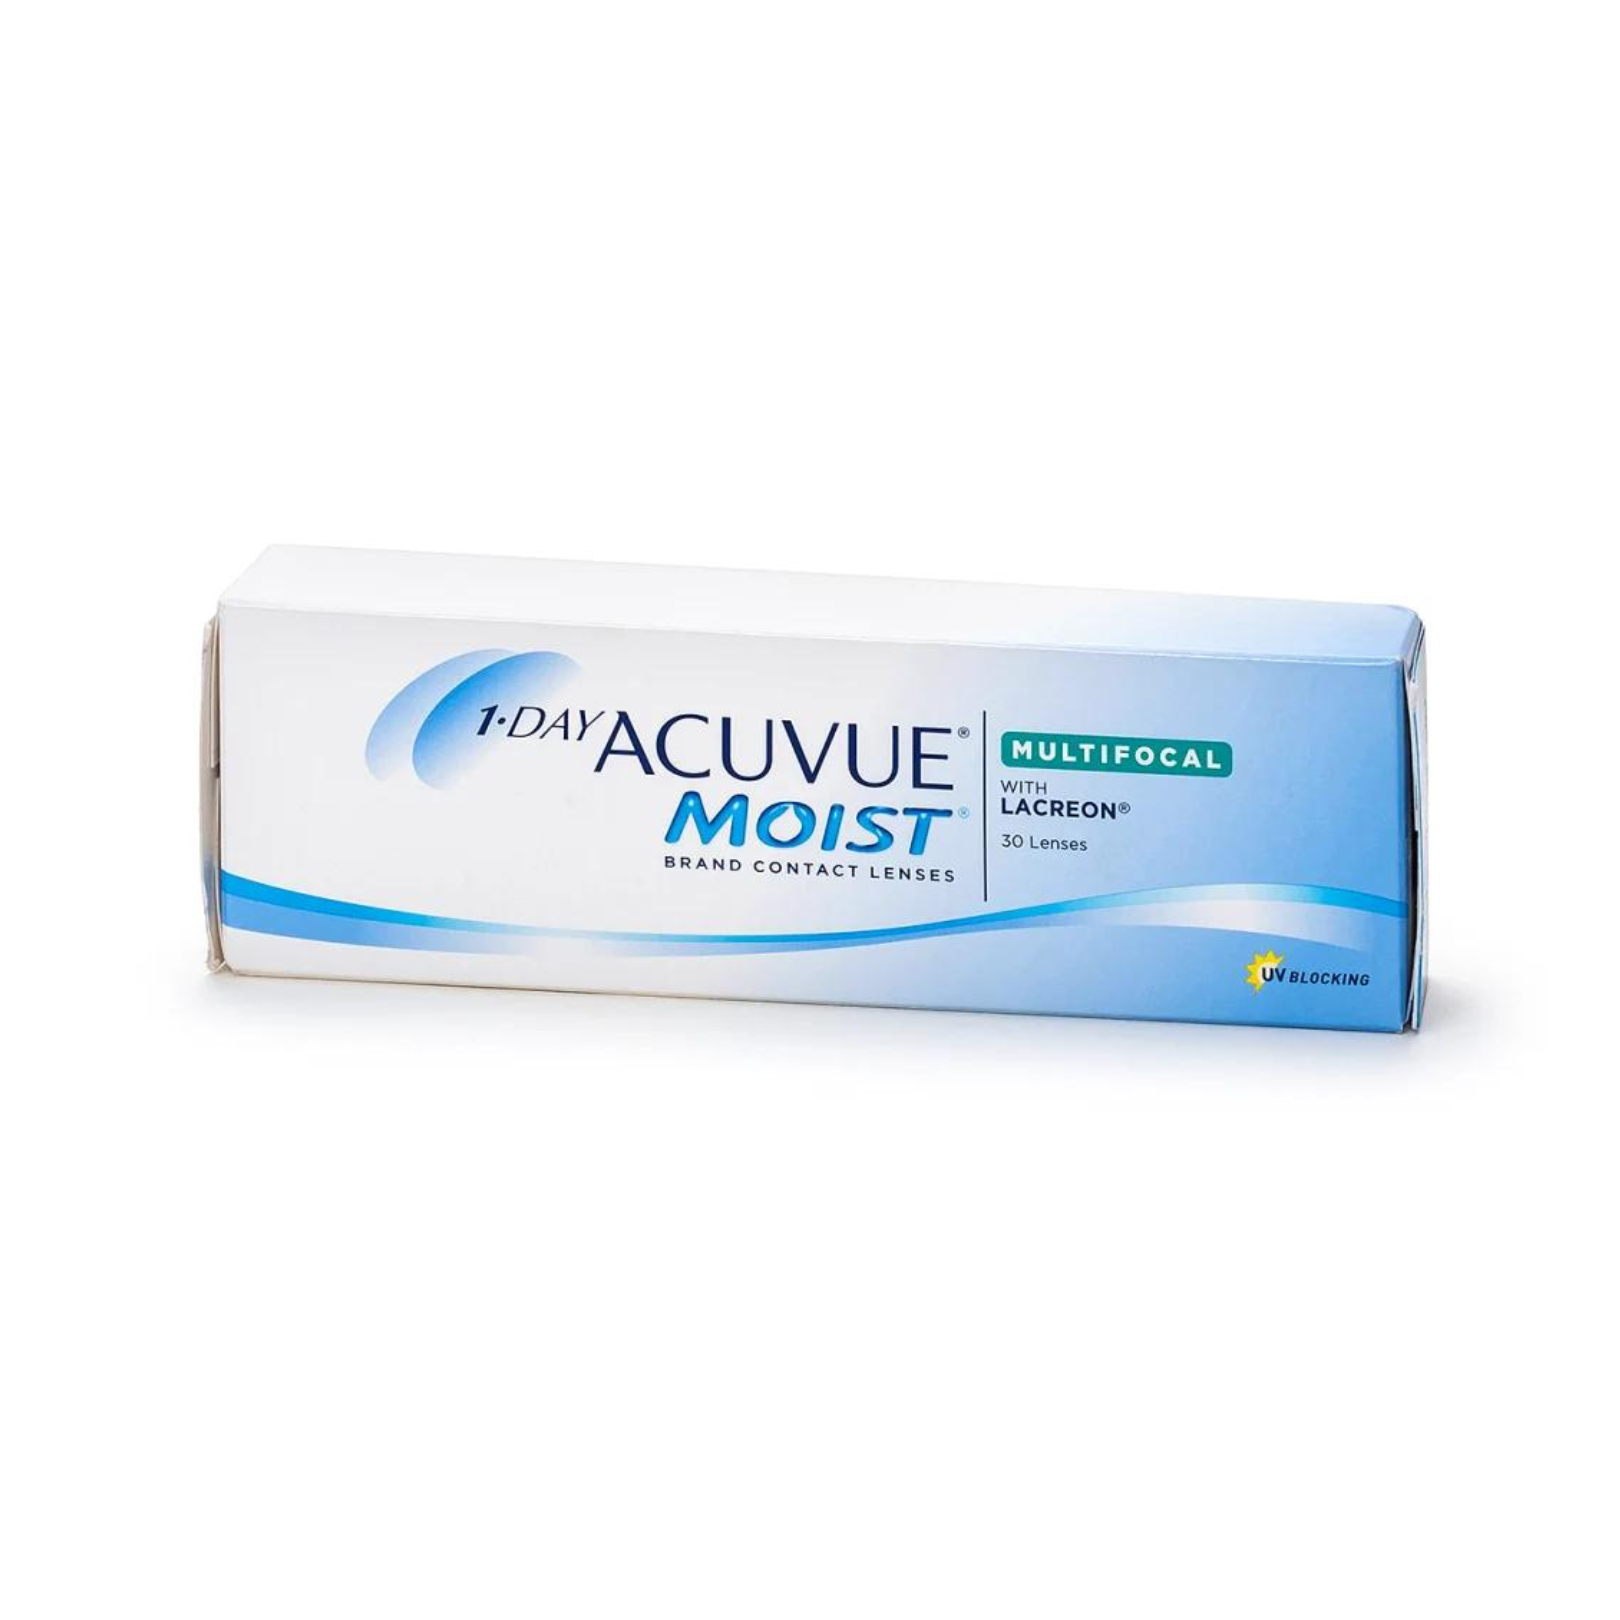 1-day Acuvue Moist Multifocal - 30 / 90 pack